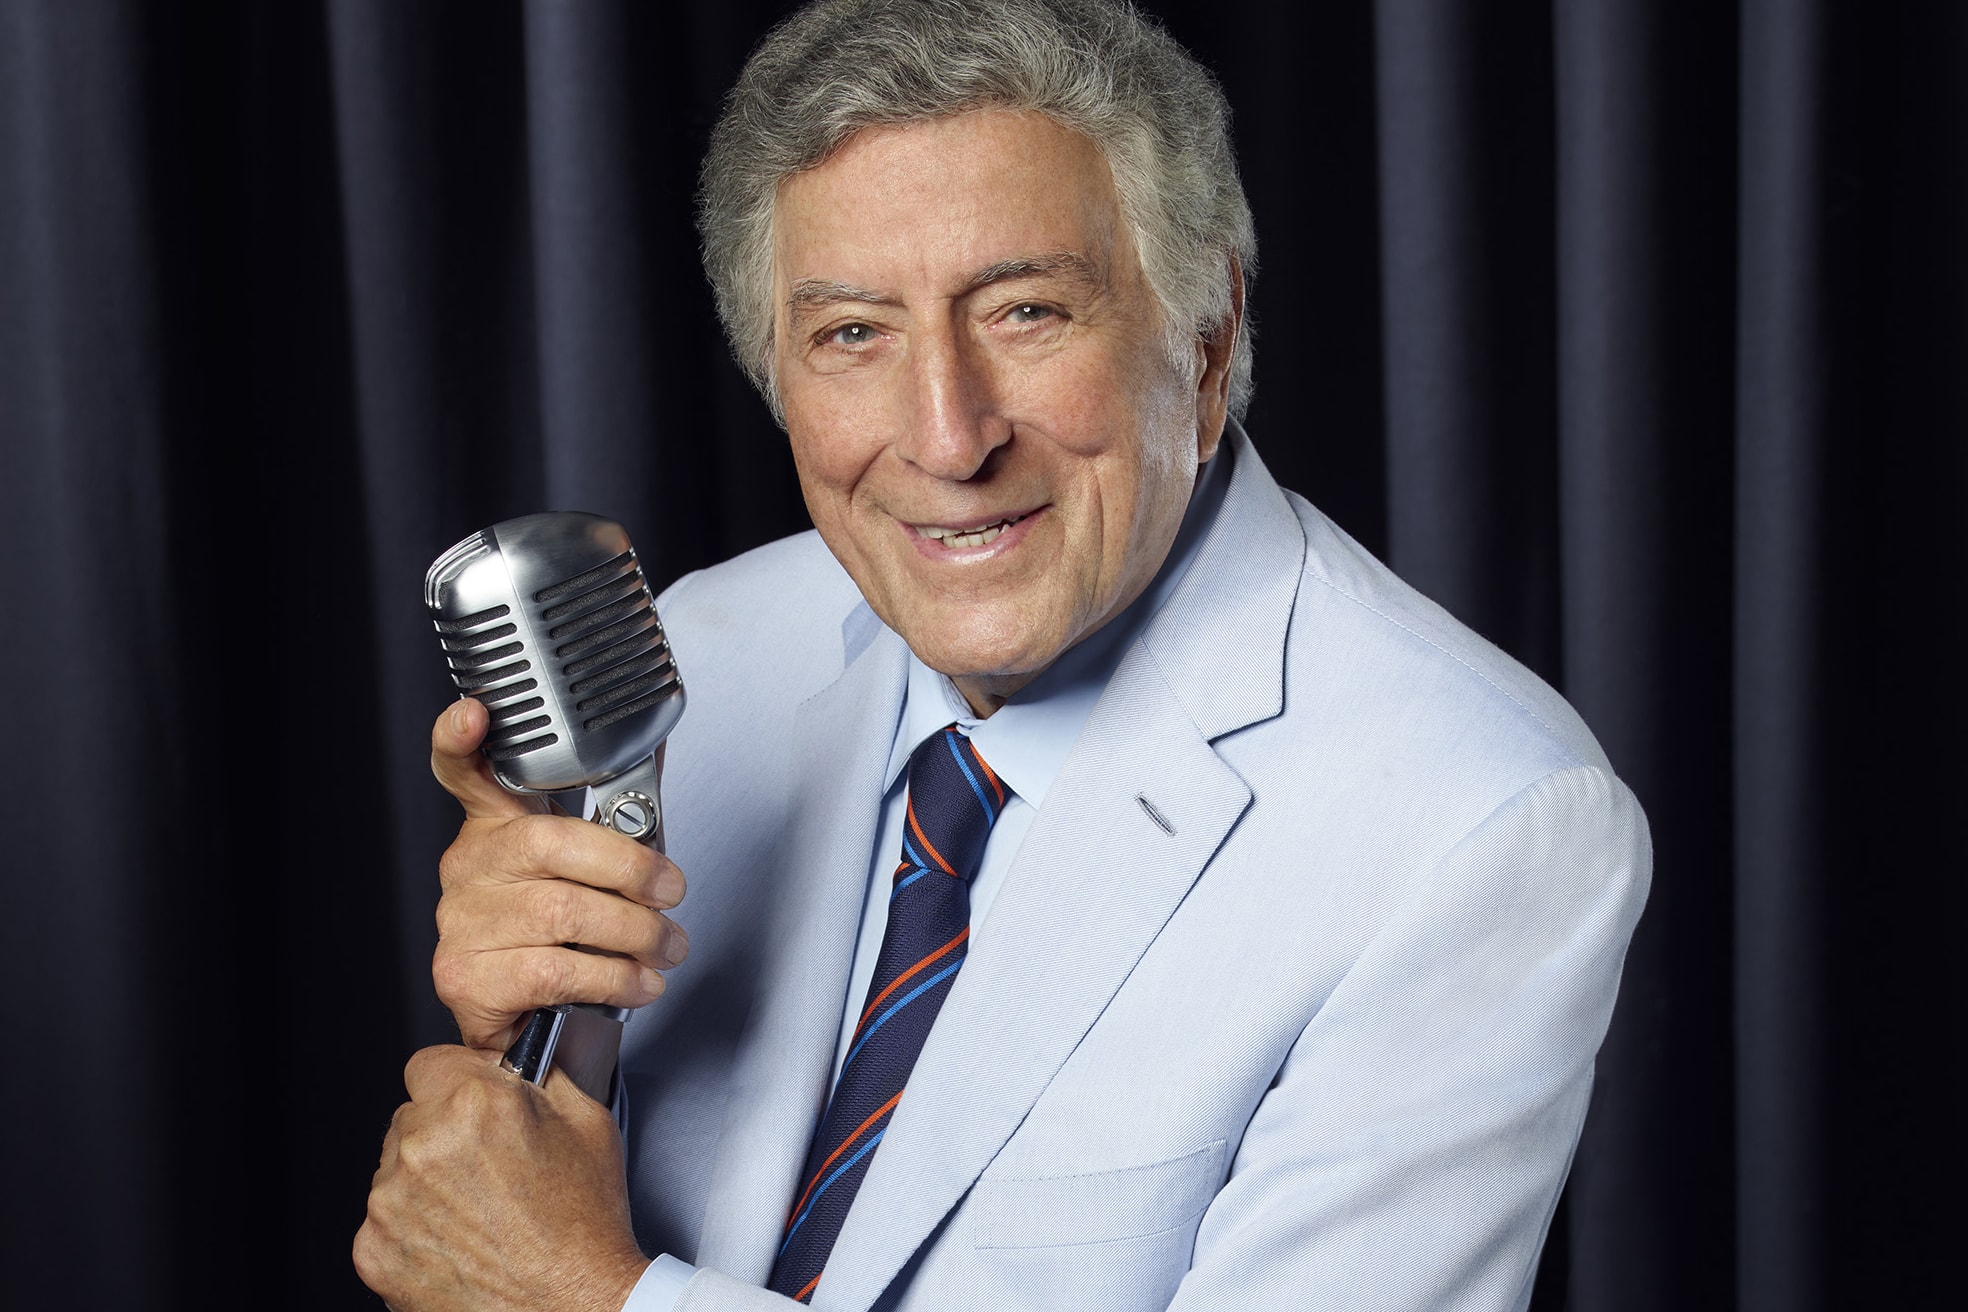 tony bennett singer american songbook jazz legend icon dead death 96 cause of info story